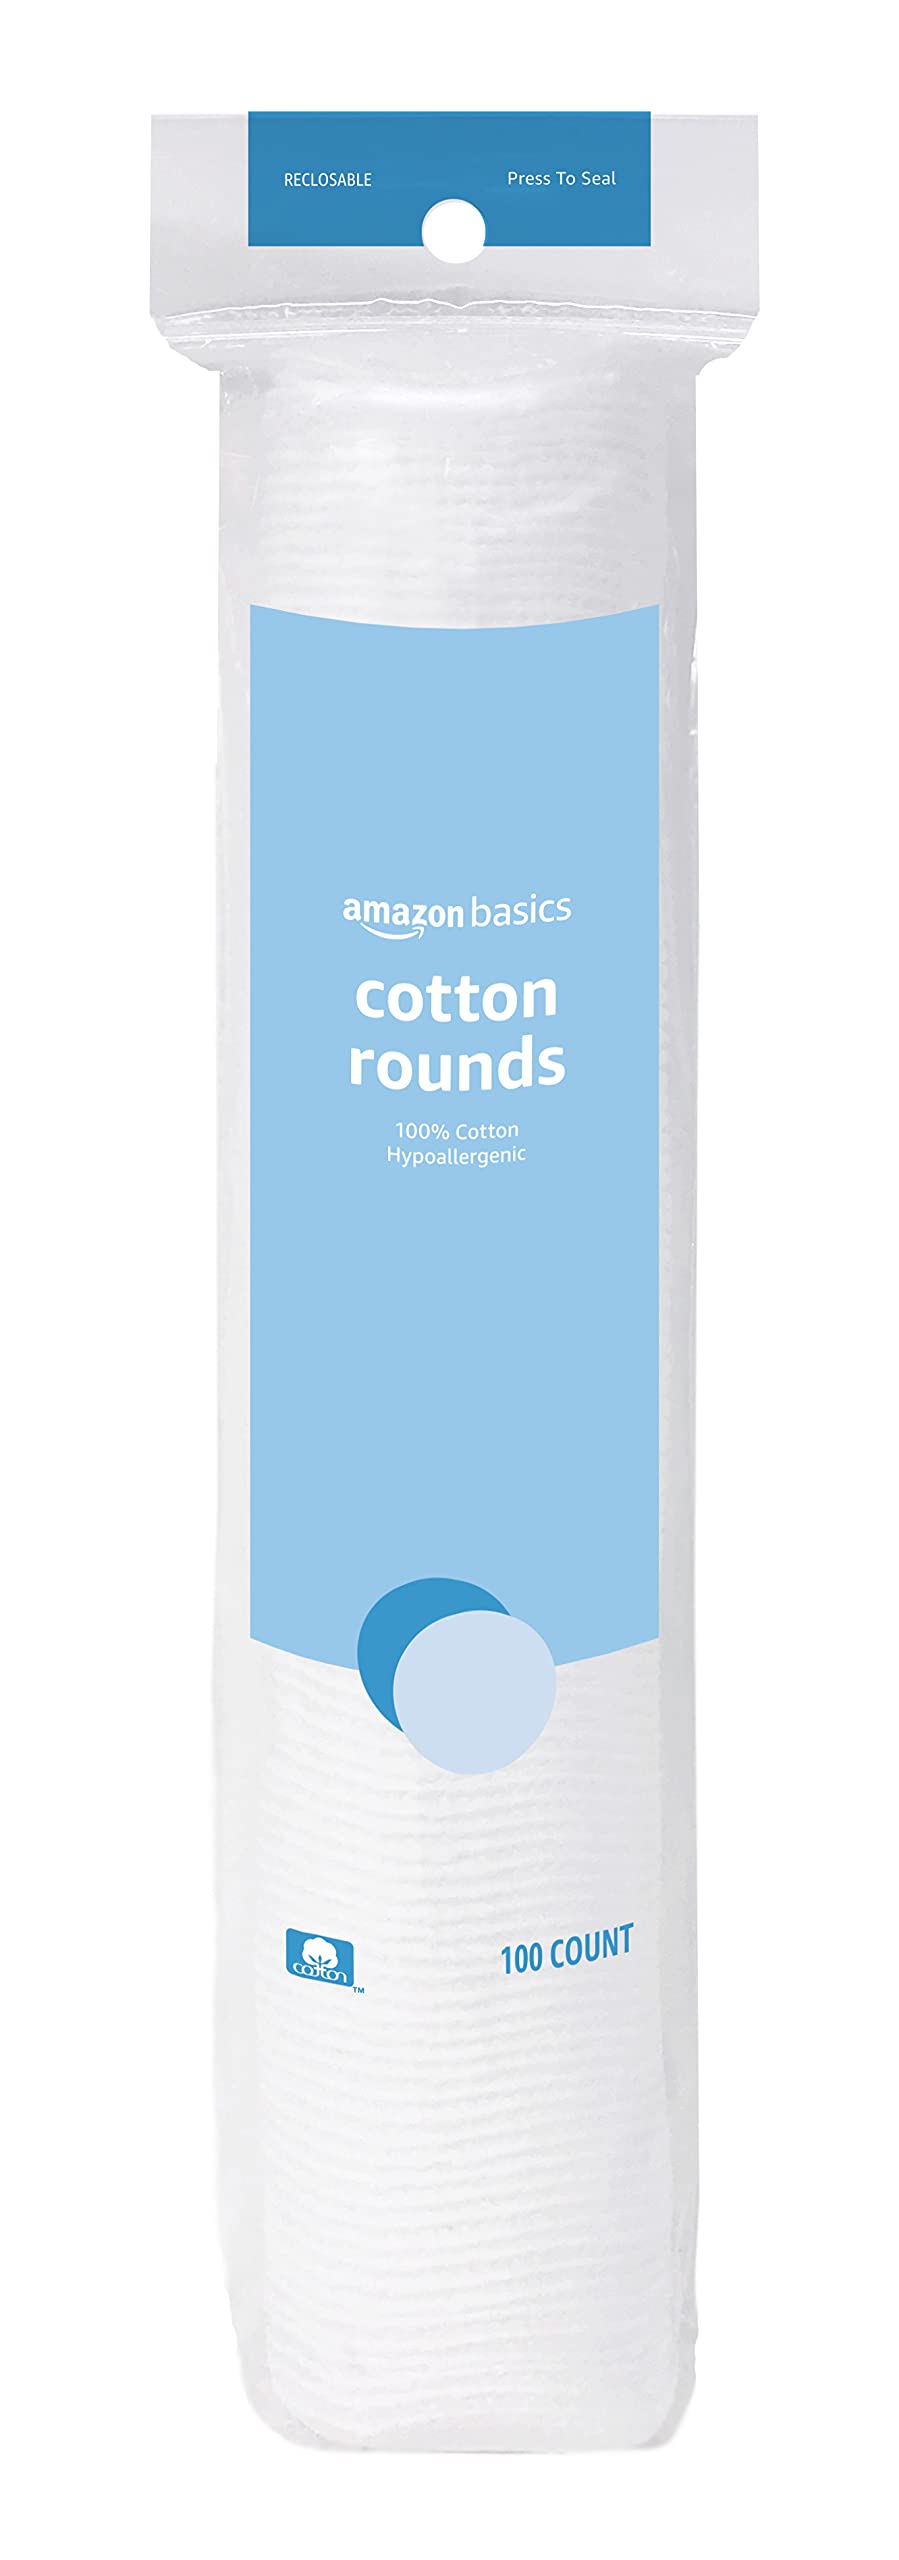 Amazon Basics Cotton Rounds, 600 Count (6 Packs of 100) (Previously Solimo)